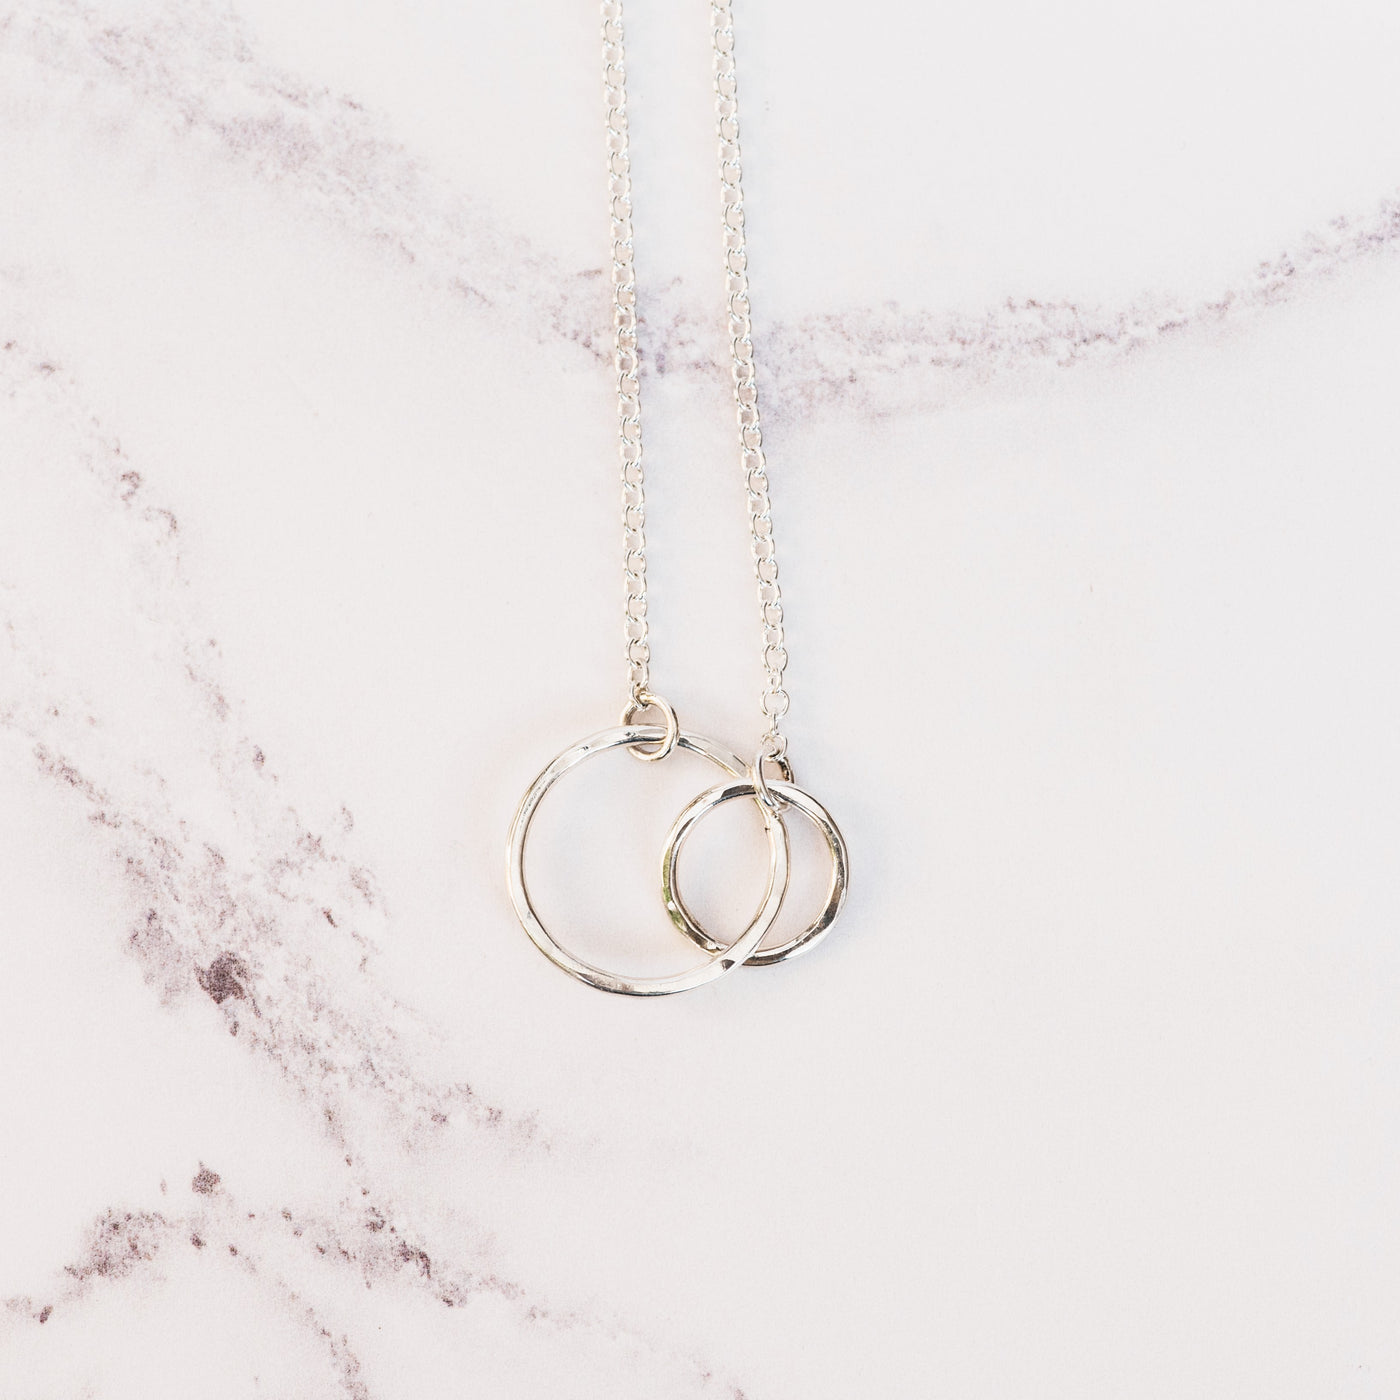 Hammered Silver Double Circle Pendant